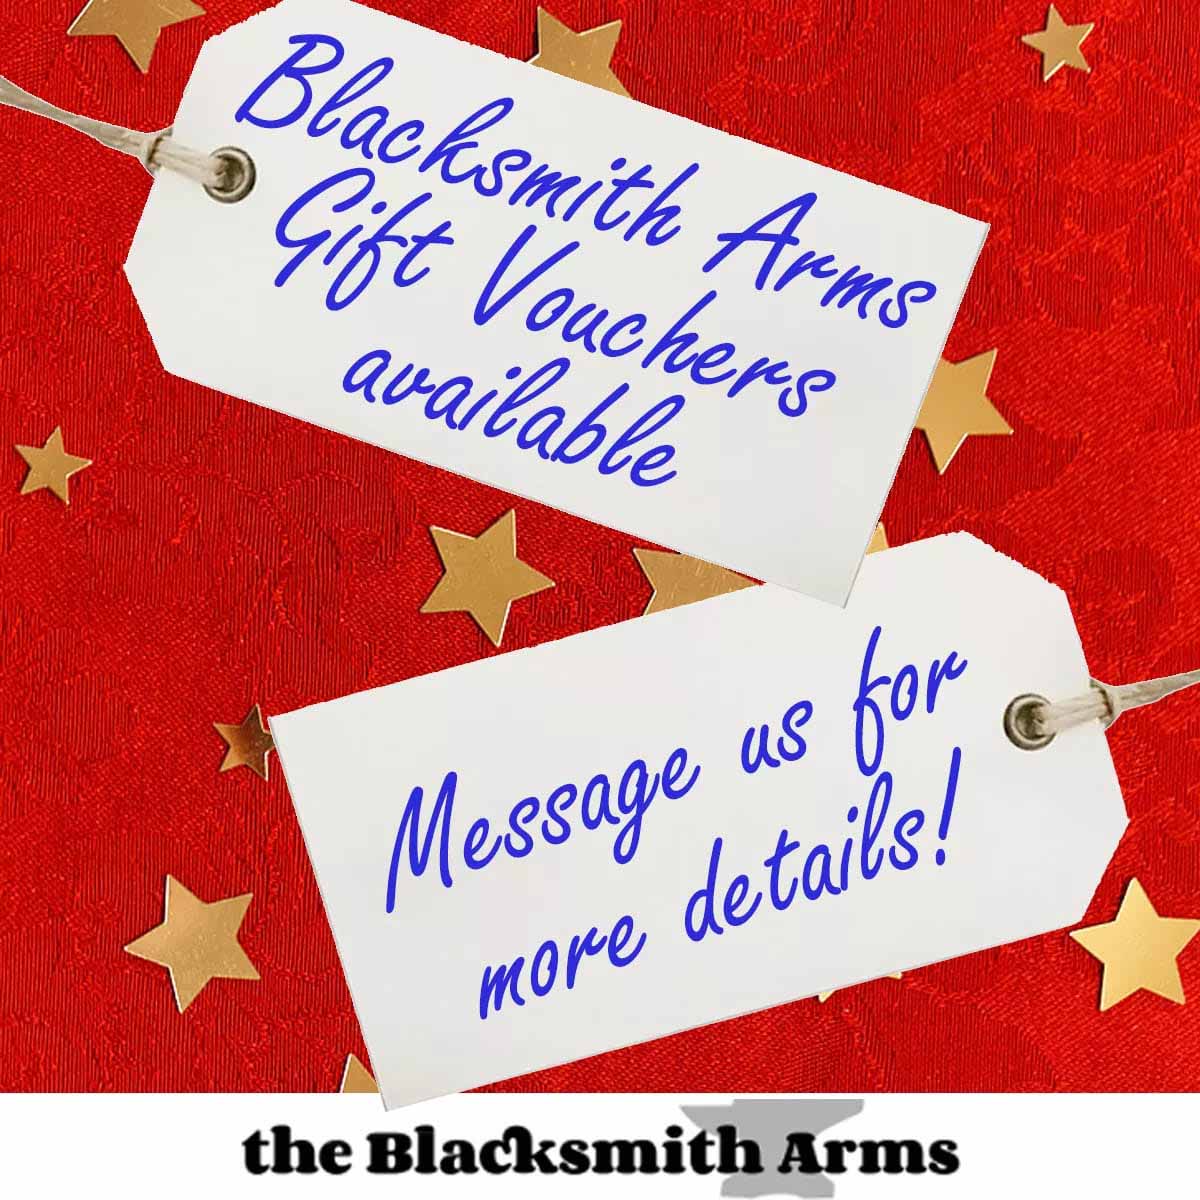 image advertising the Blacksmith Arms vouchers